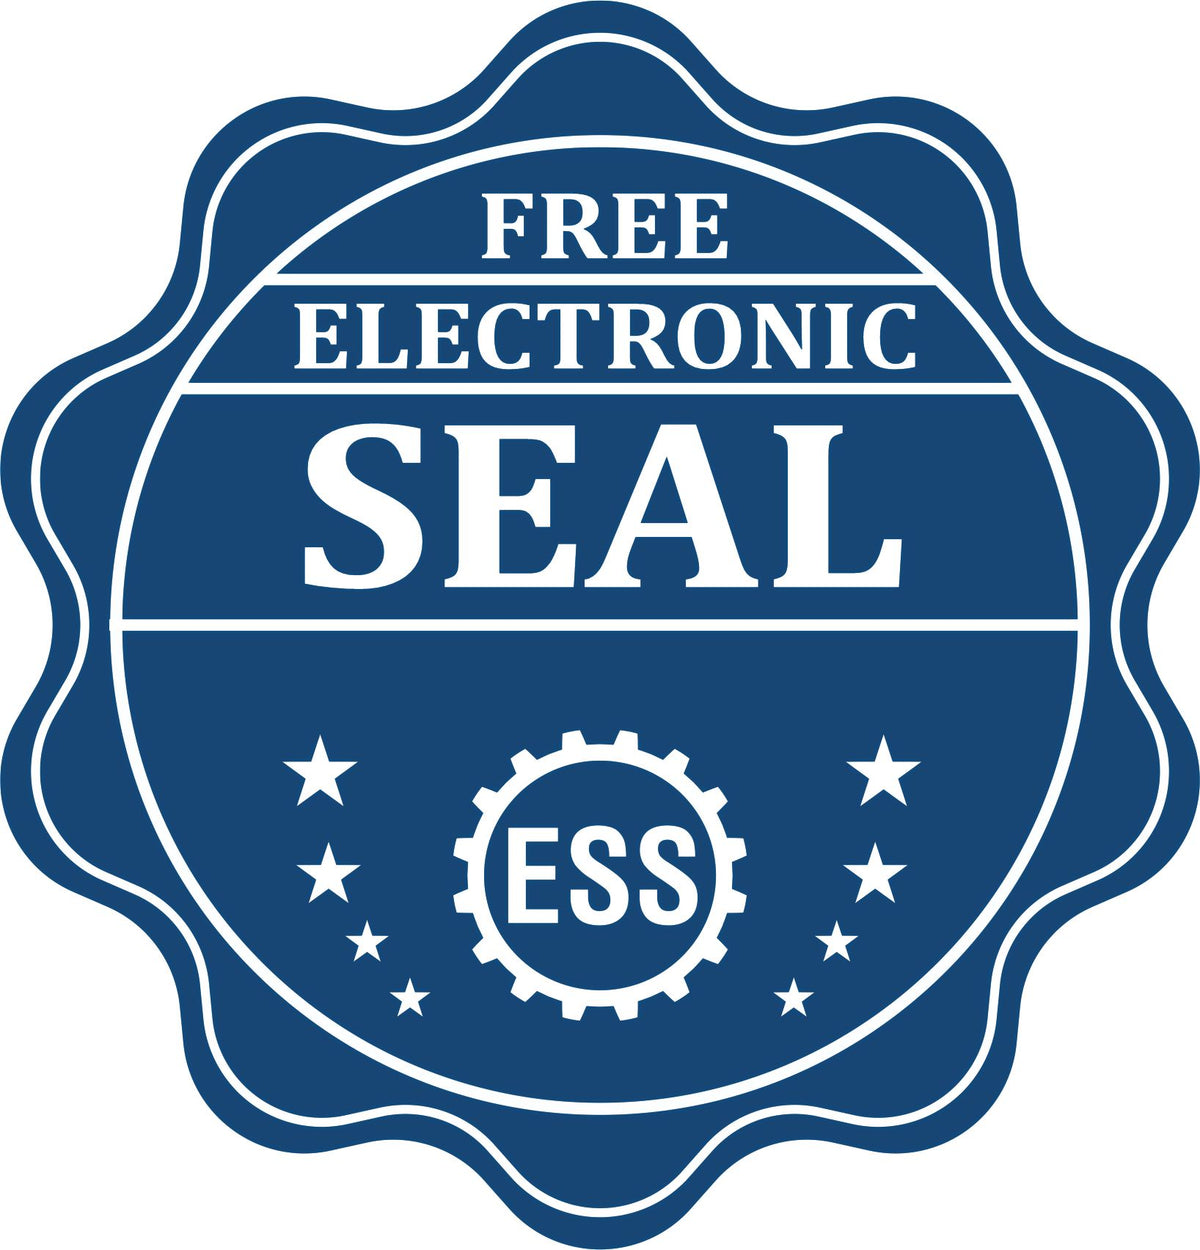 A badge showing a free electronic seal for the Gift Louisiana Landscape Architect Seal with stars and the ESS gear on the emblem.